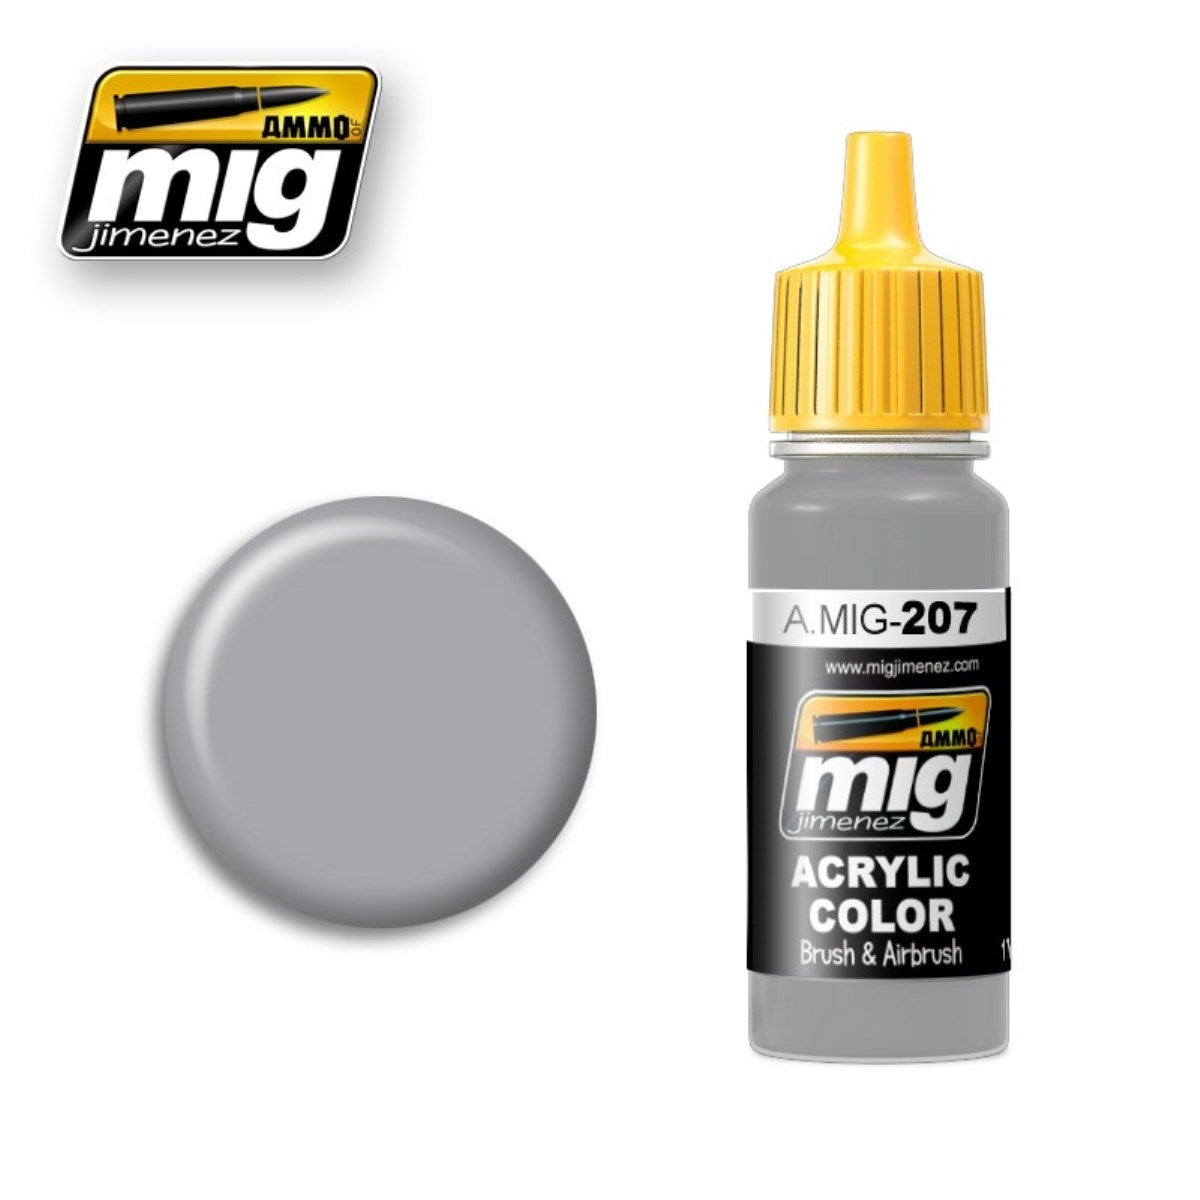 Mig Ammo Fs36314 (Bs620) Barley Gray MIG PAINT, BRUSHES & SUPPLIES